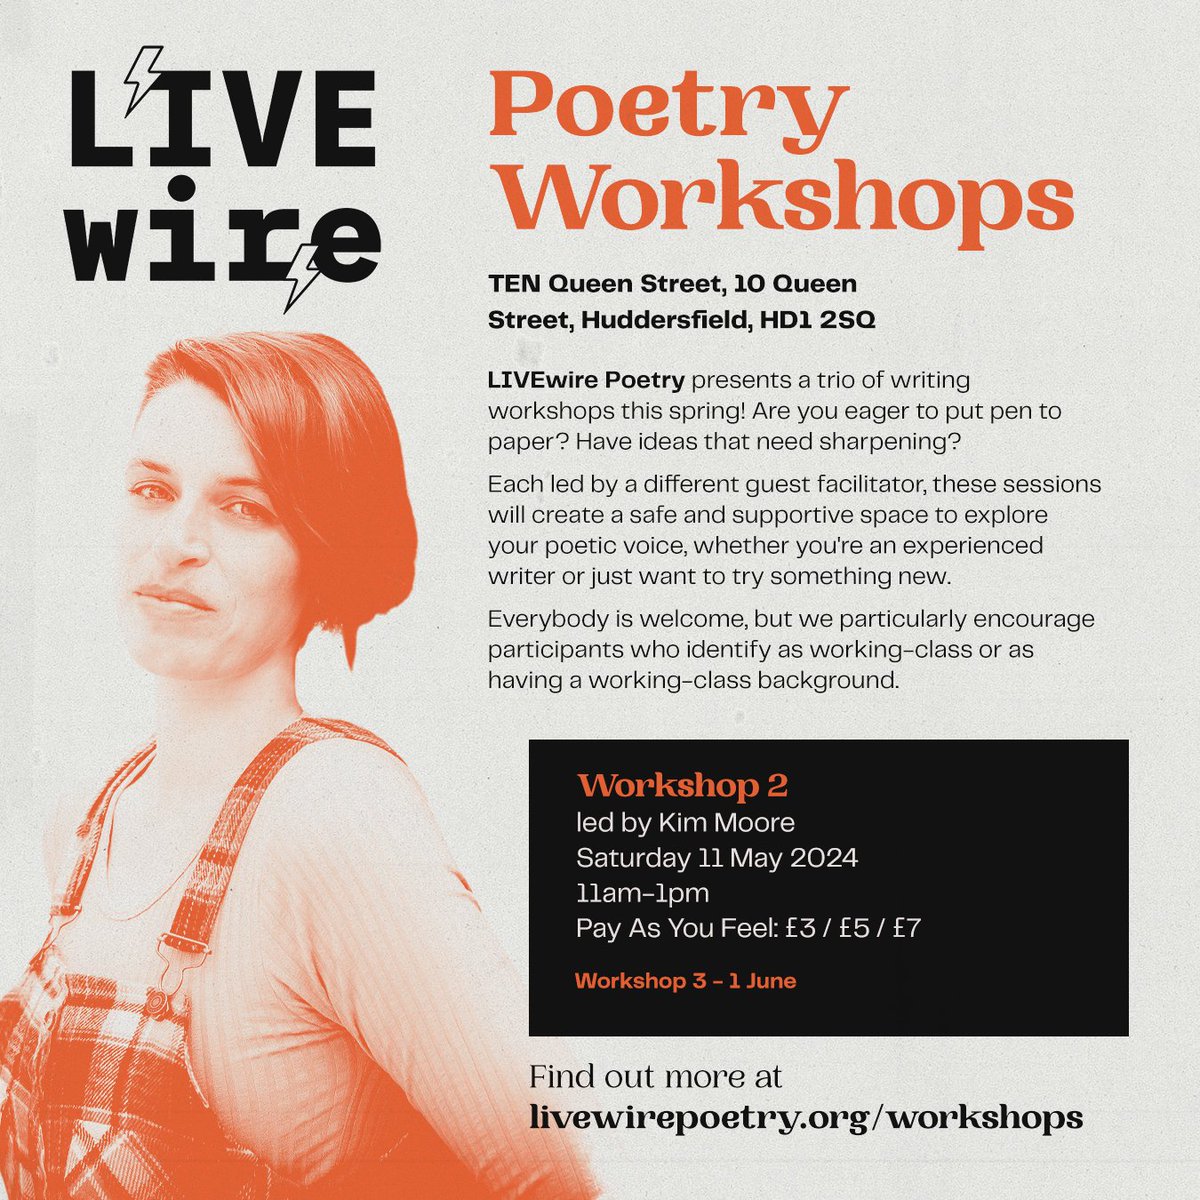 Calling all West Yorkshire-based poets! Our second Huddersfield workshop takes place this coming Saturday (11am-1pm) and will be led by the phenomenal @kimmoorepoet ✍️ Tickets are available below from just £3, and everybody is welcome. eventbrite.com/e/891856786657